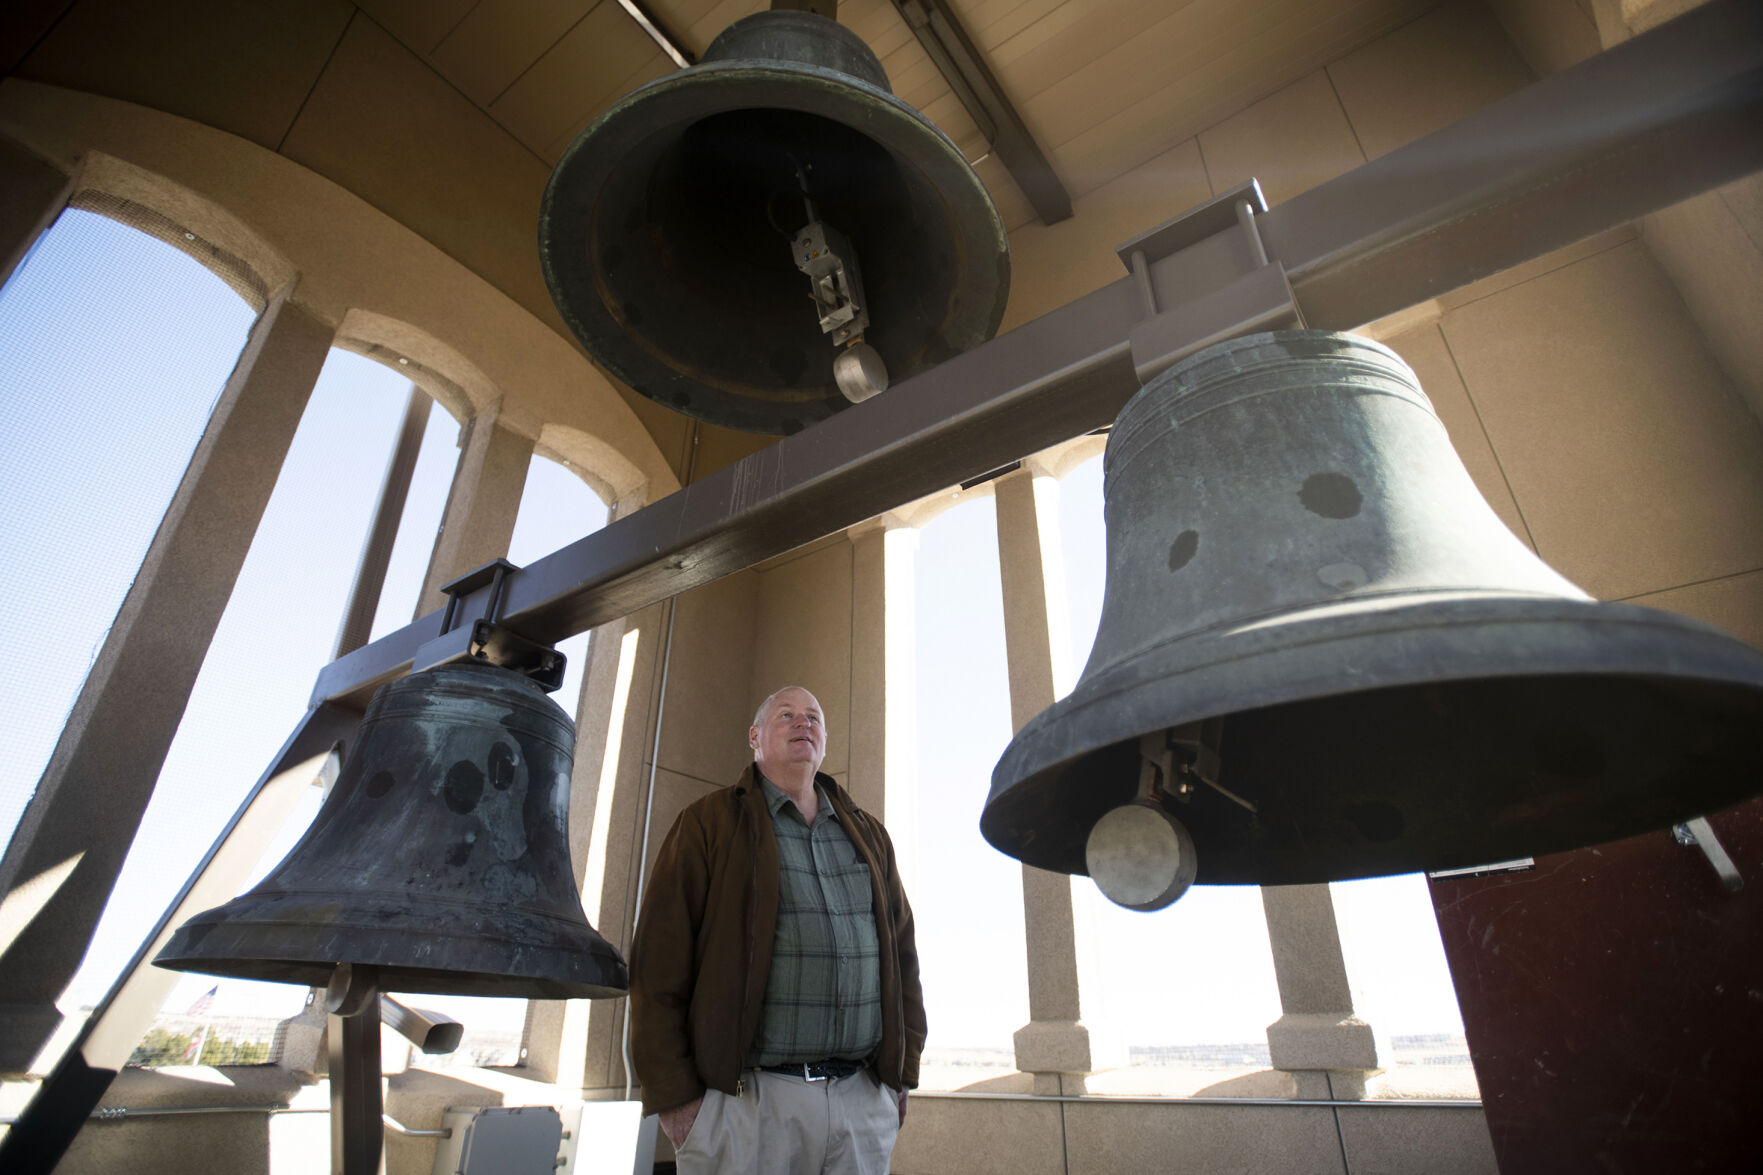 Hear the bells ring at one of NJ's four carillons, St. Peter's Church in  Morristown